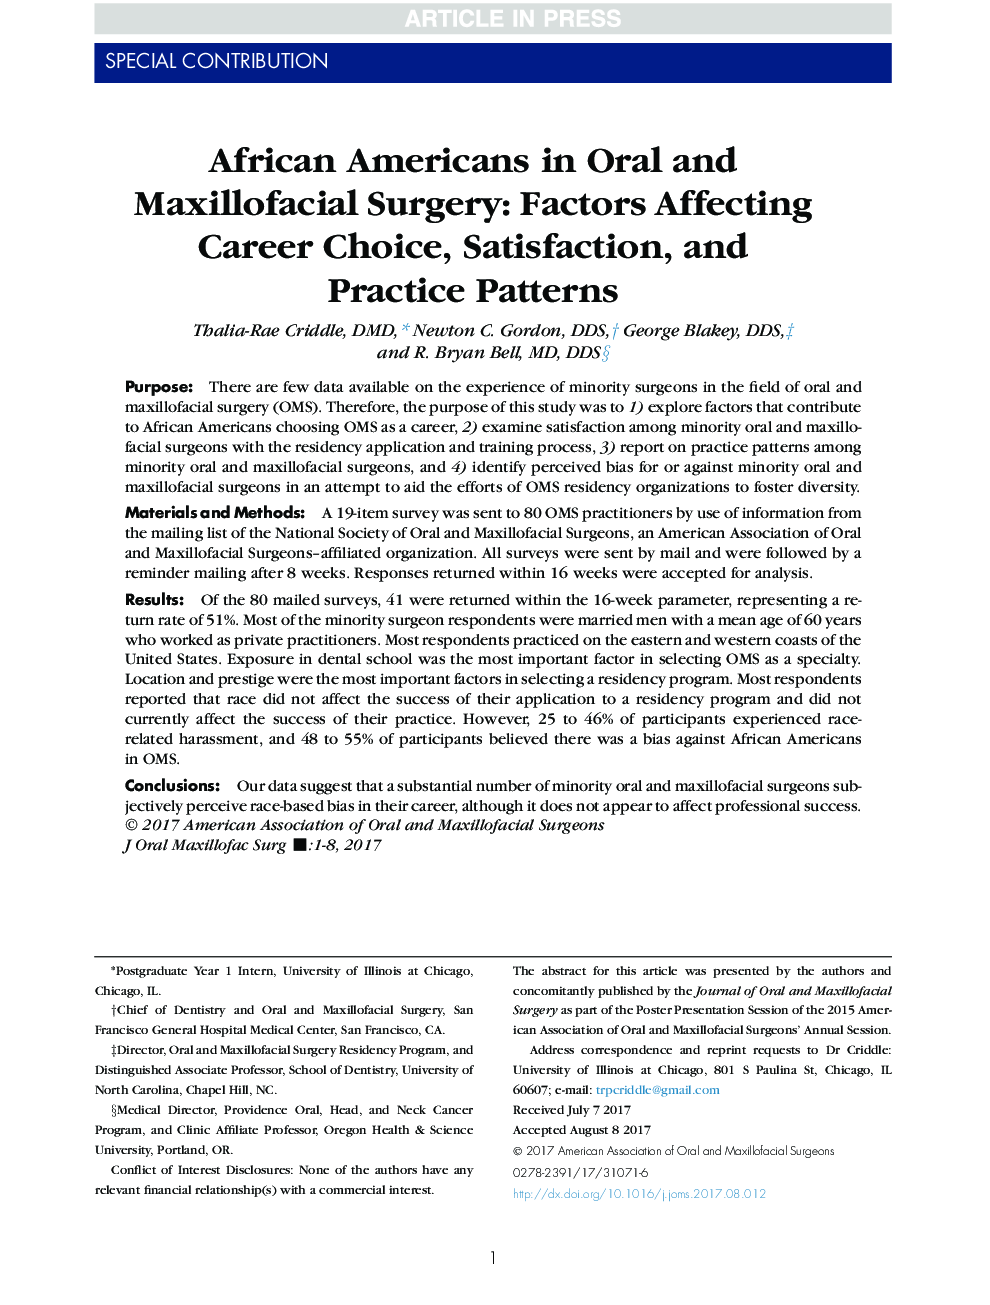 African Americans in Oral and Maxillofacial Surgery: Factors Affecting Career Choice, Satisfaction, and Practice Patterns